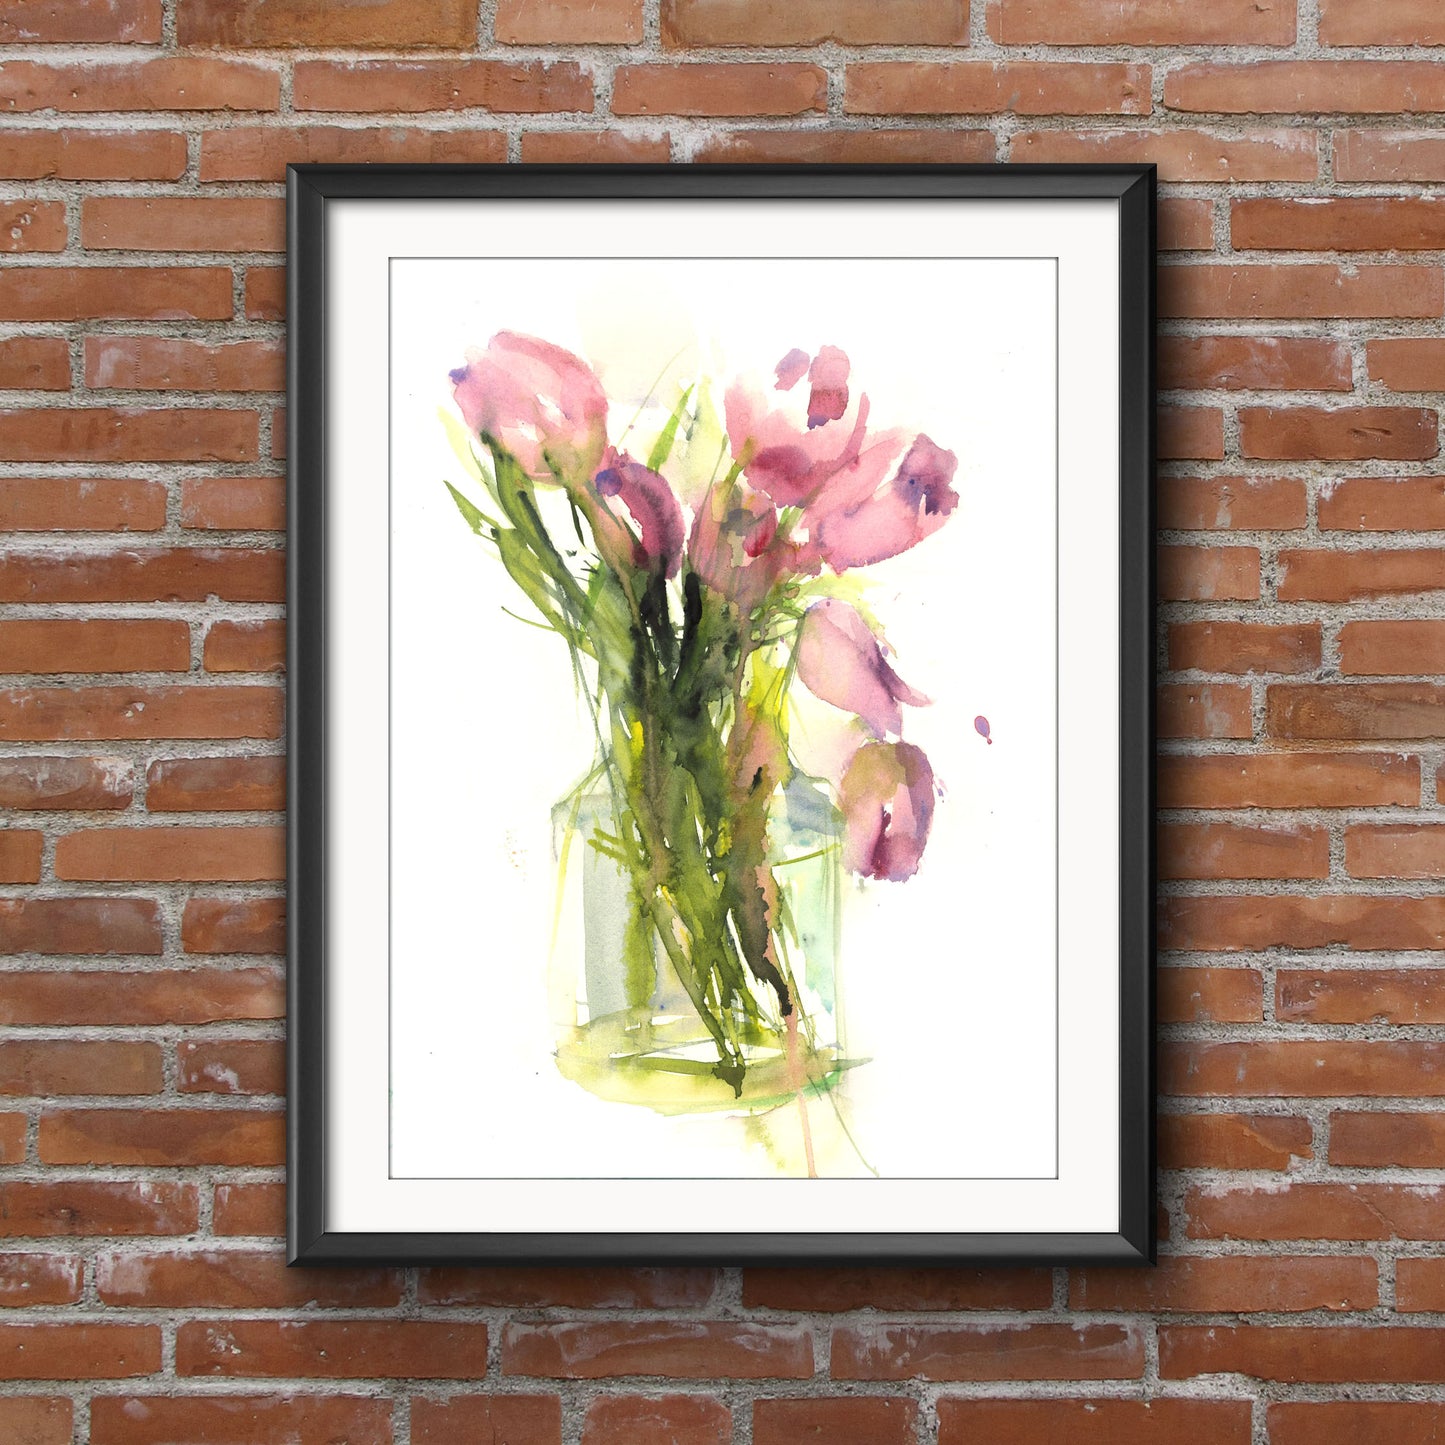 Art print from original watercolour painting "Spring tulips"